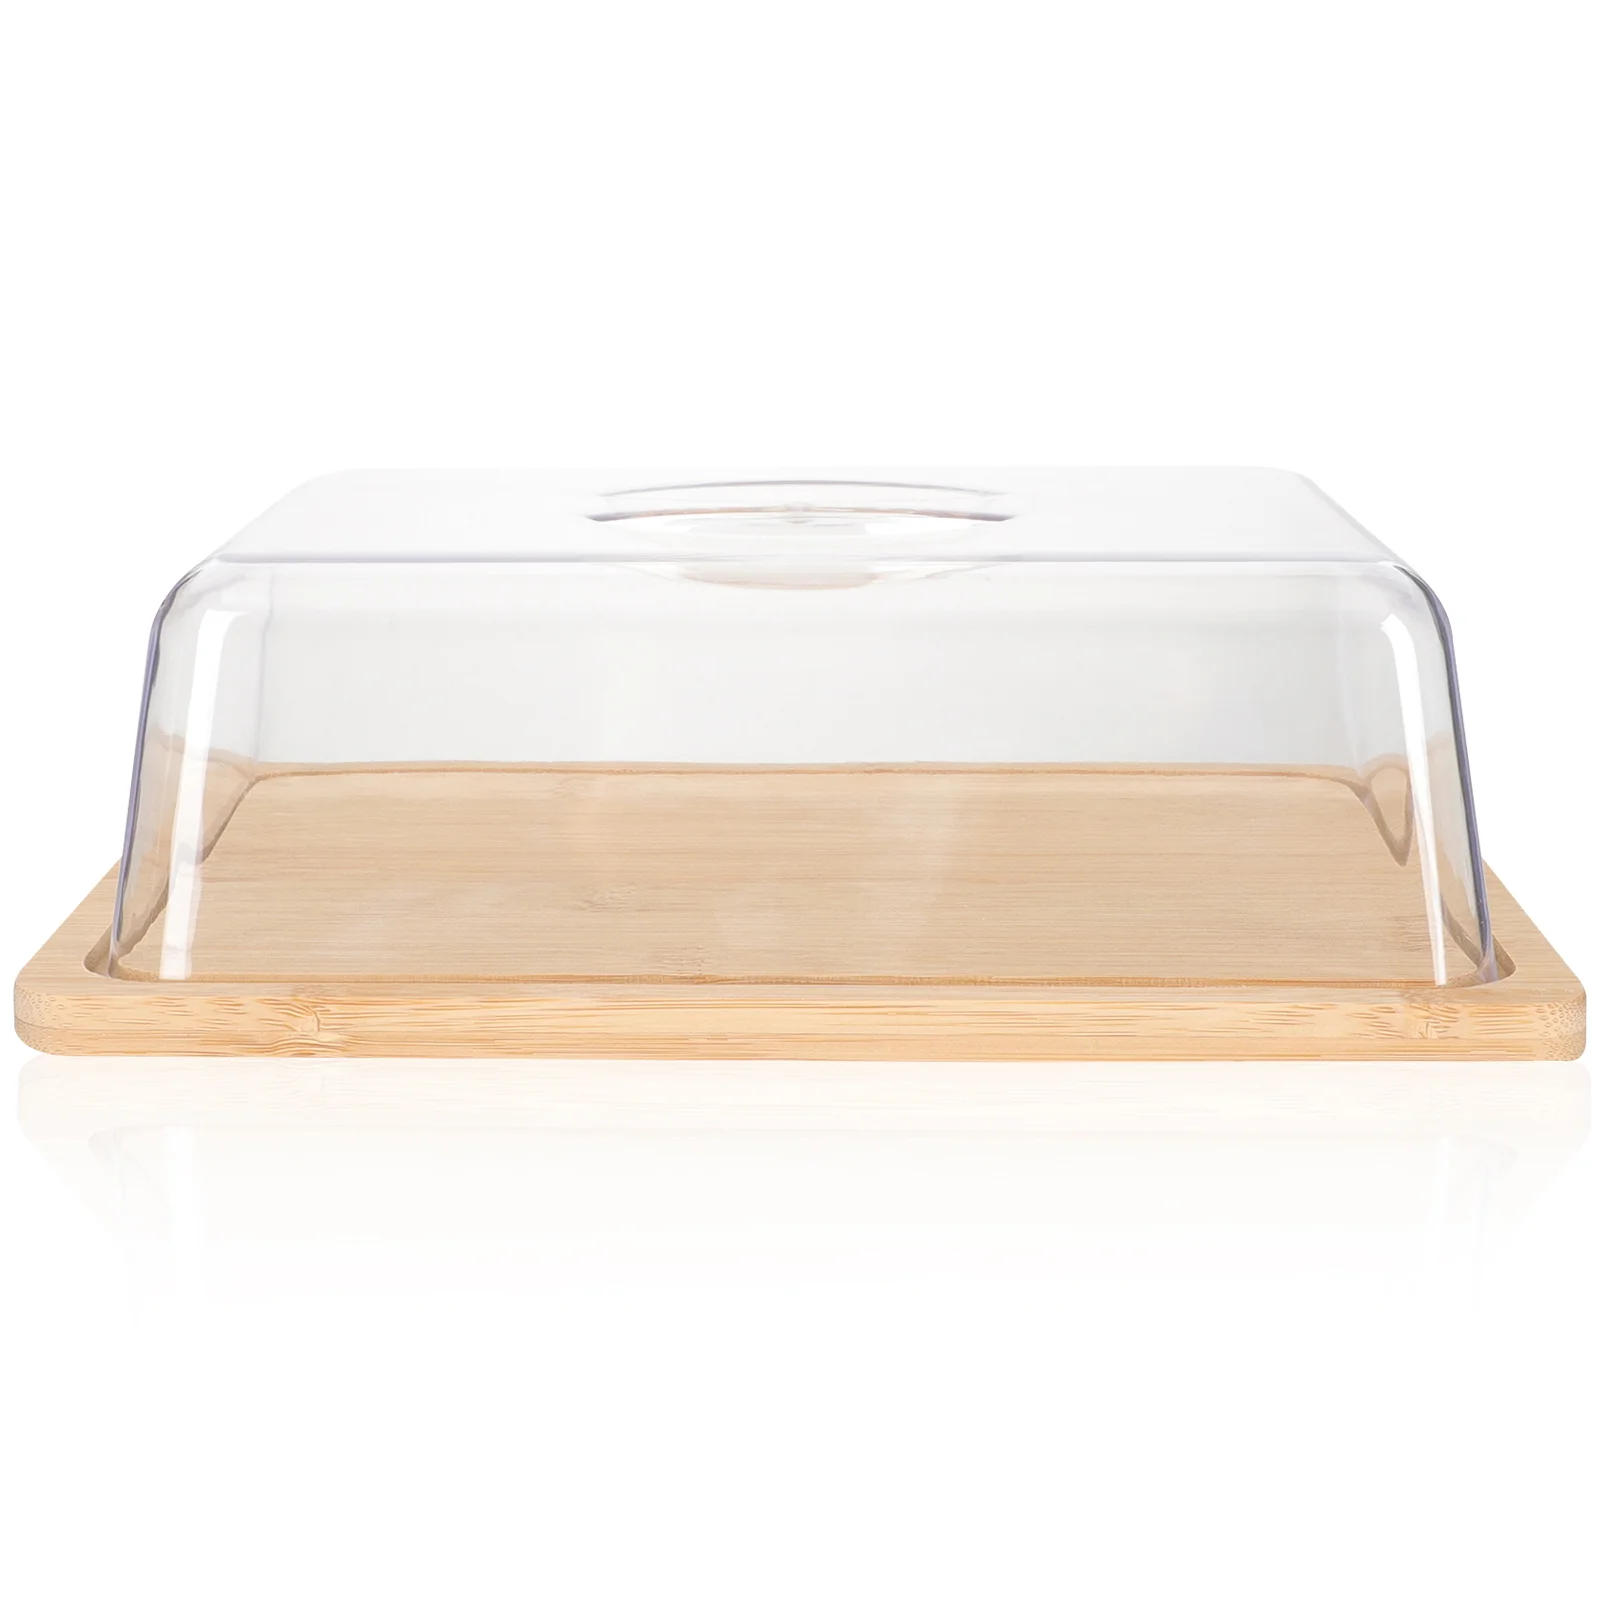 

Snack Box Lid Butter Dish Refrigerator Large Cheese Tray Holder Server Dishes Farmhouse Container Fridge Sealed Containers Food